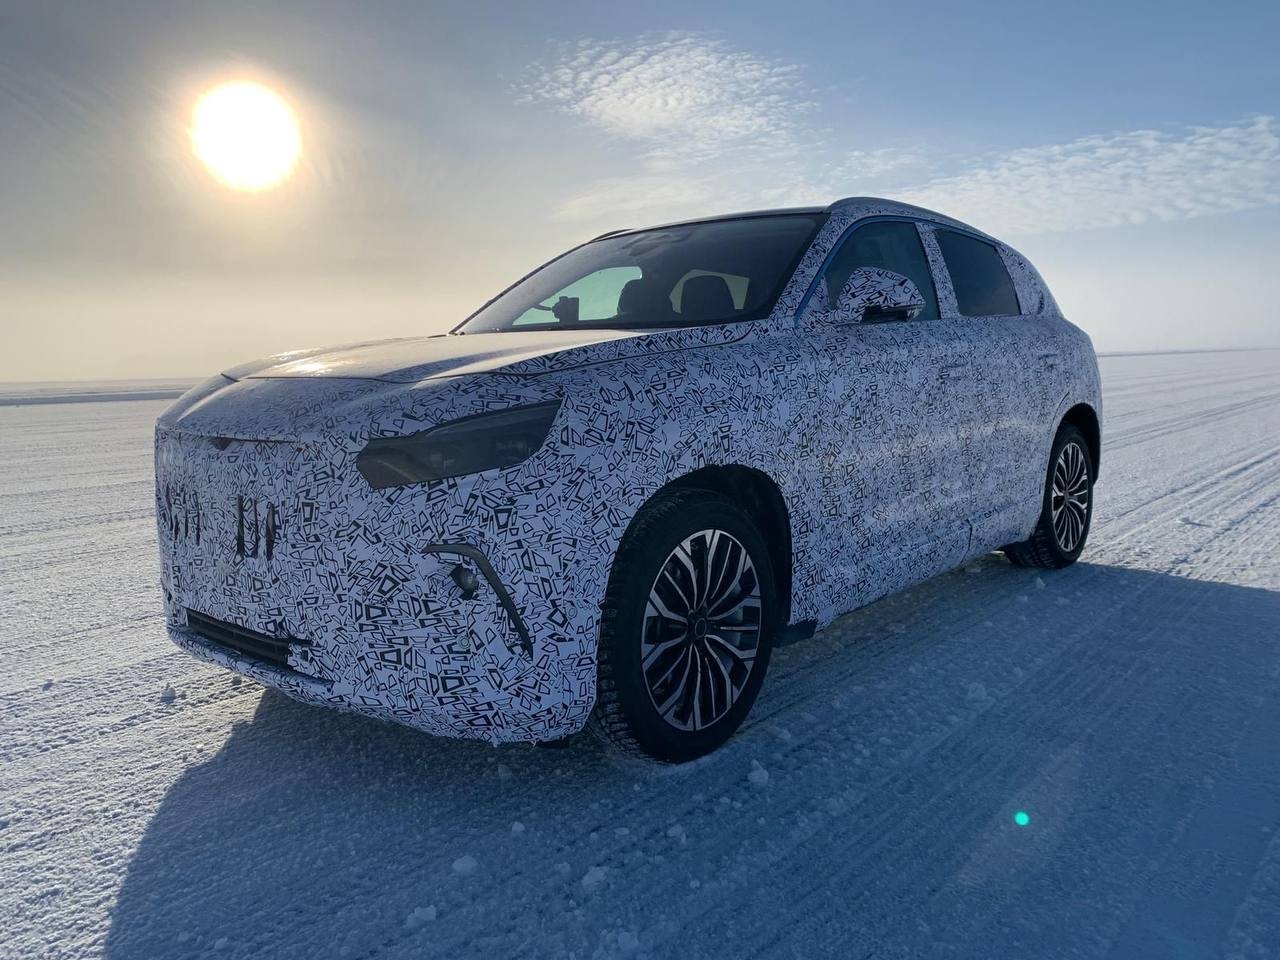 Togg continues the testing process for Turkey’s first domestic, fully electric car amid harsh winter conditions, March 13, 2022. (AA Photo)